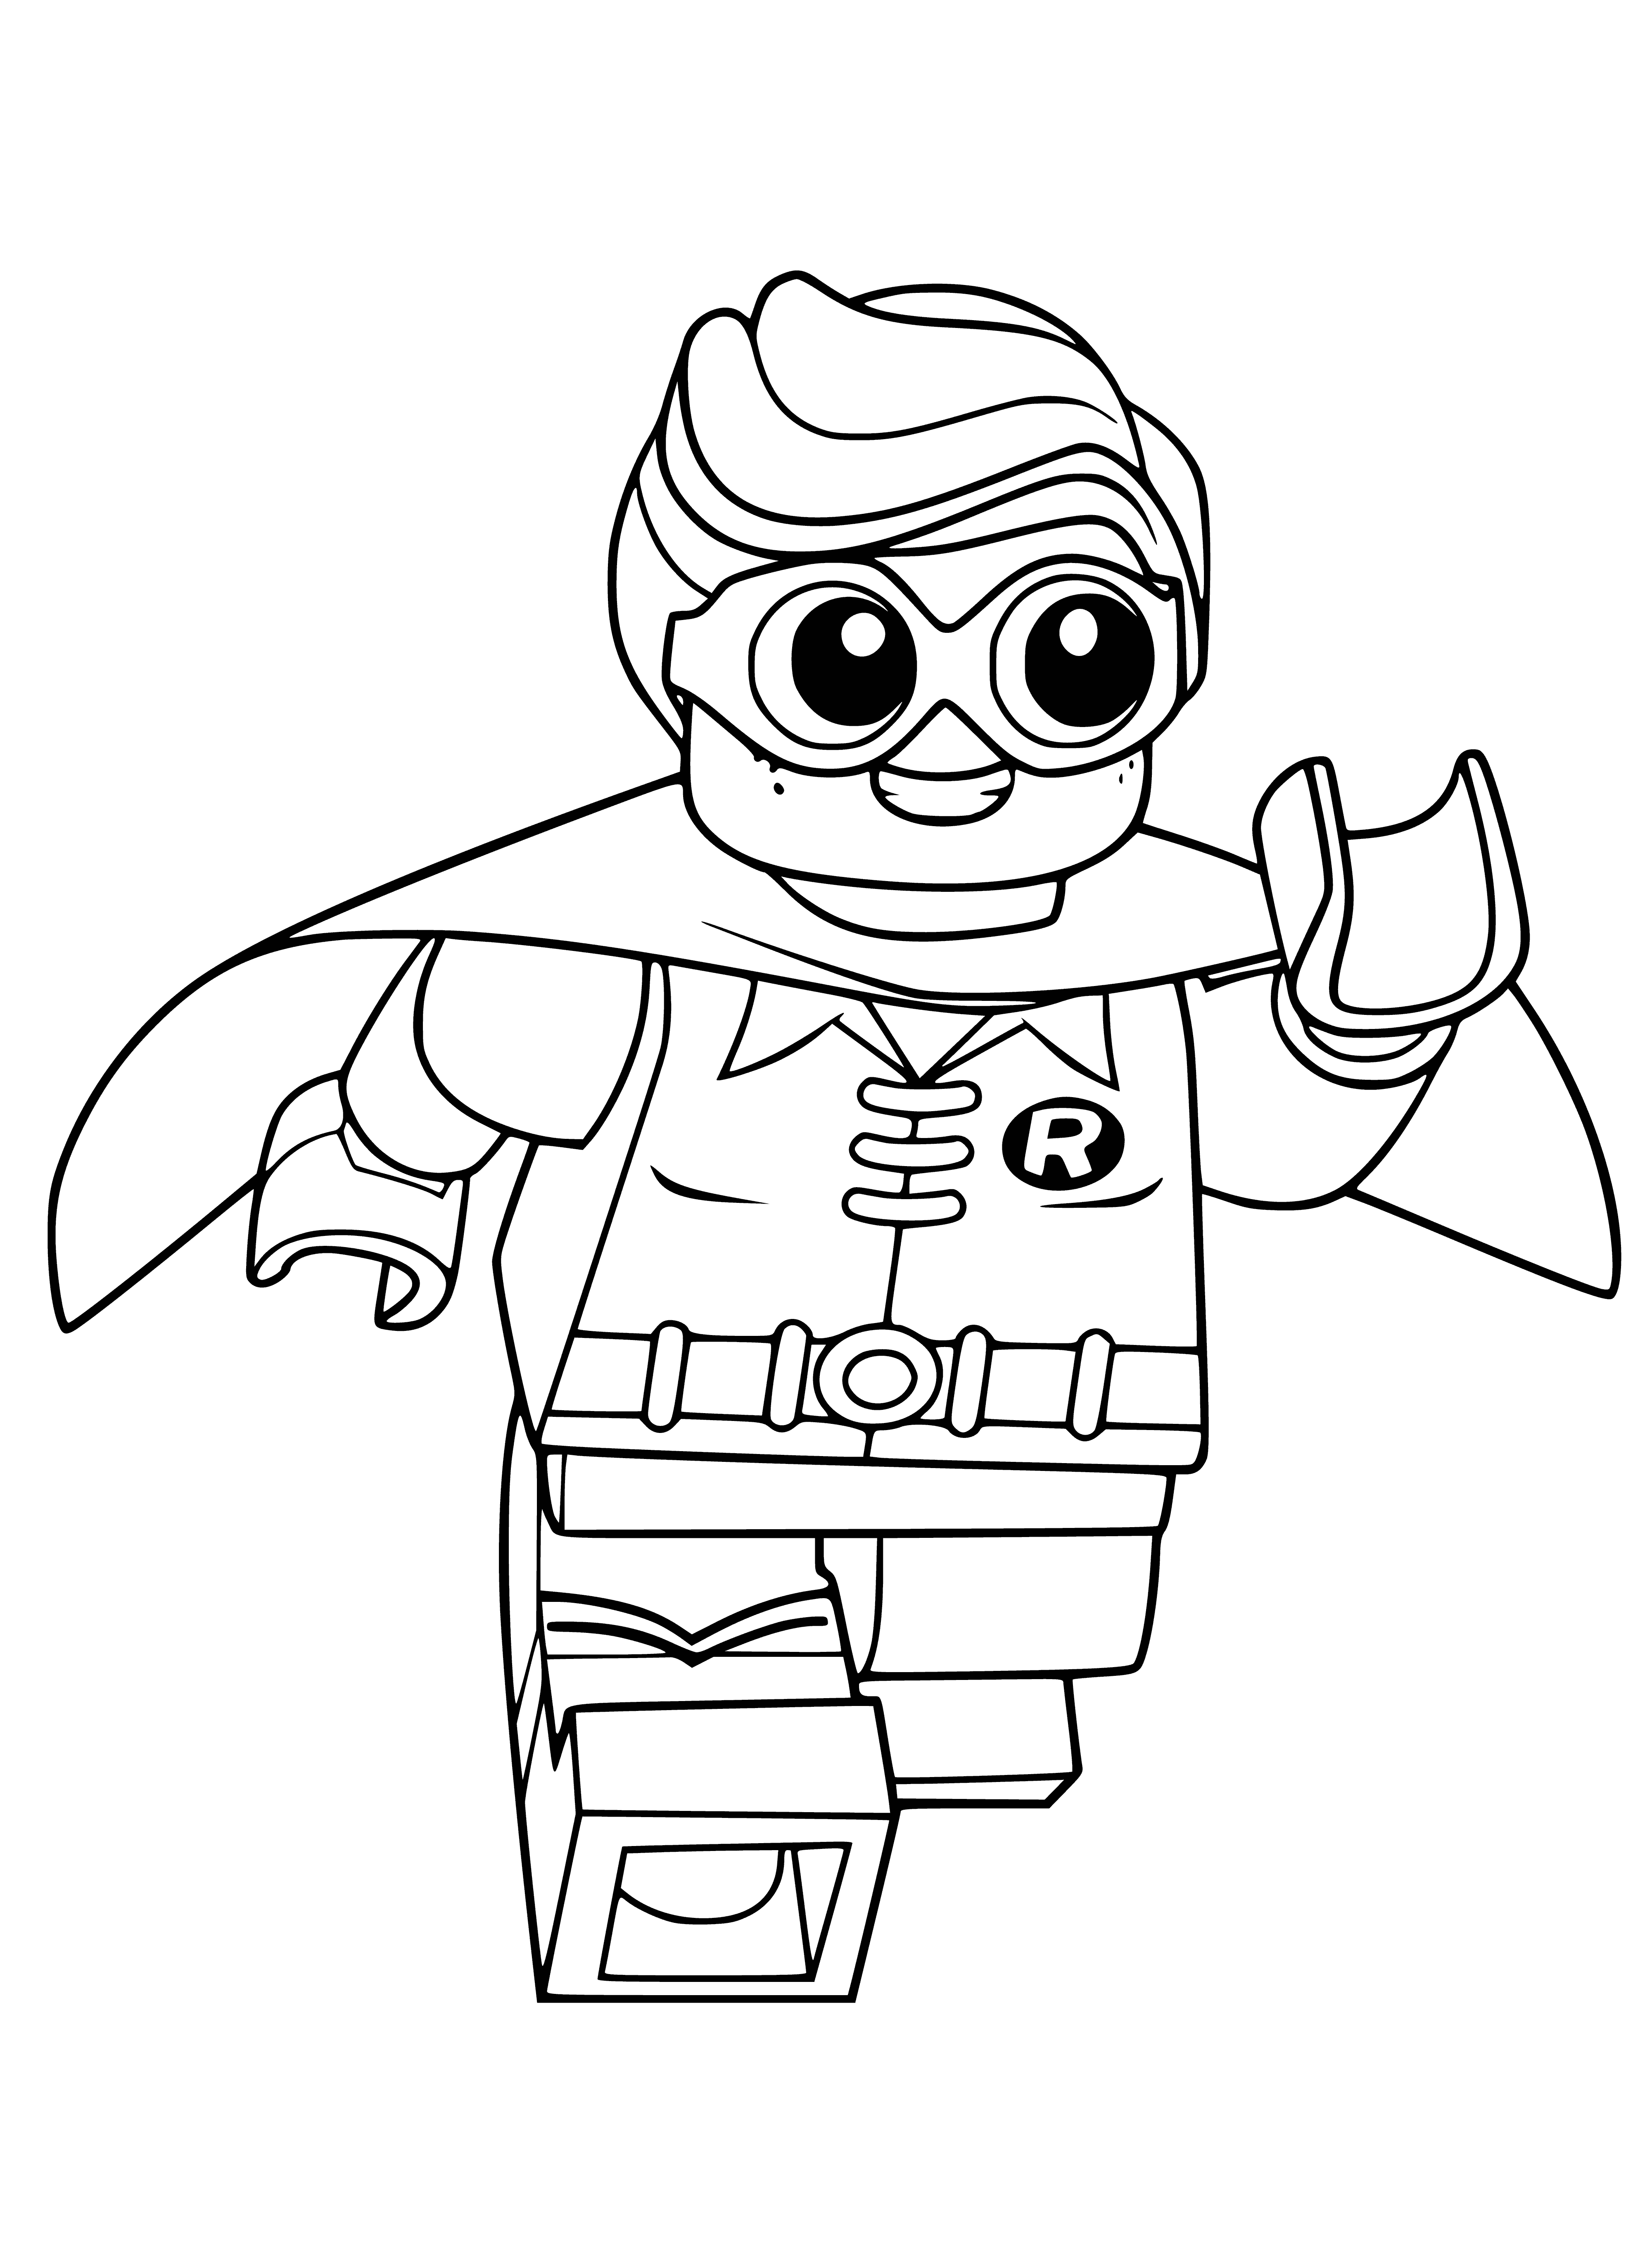 coloring page: Two people smiling while holding unique objects: a bat and a bird.